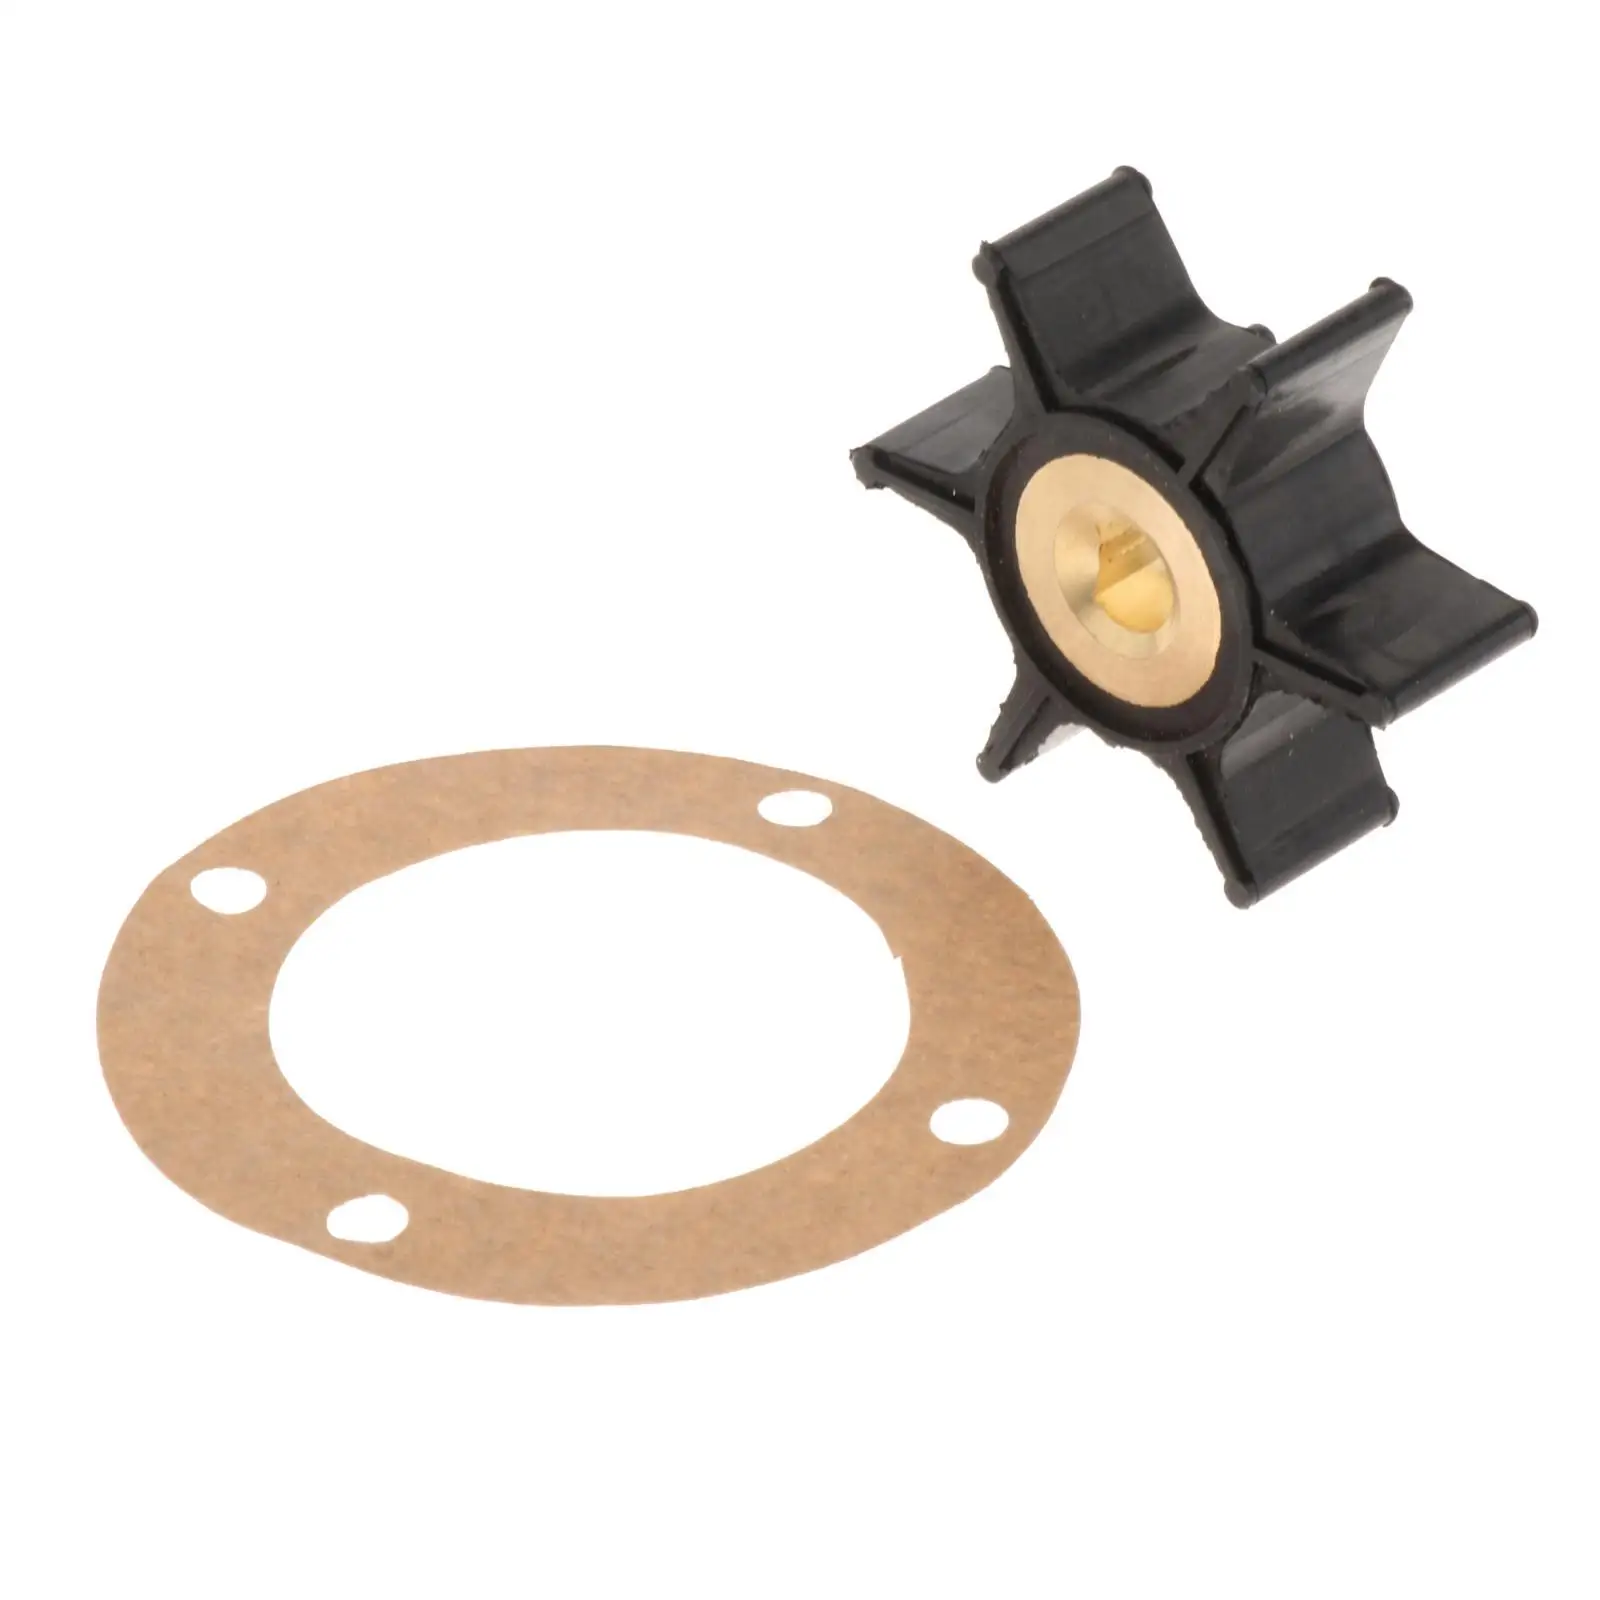 2Pcs Impeller and 4-Hole Gasket Kit Accessories Repair Kit Parts Impeller Kit Fits for Onan 131-0386 170-3172 Mcck 4.0 kW Pump